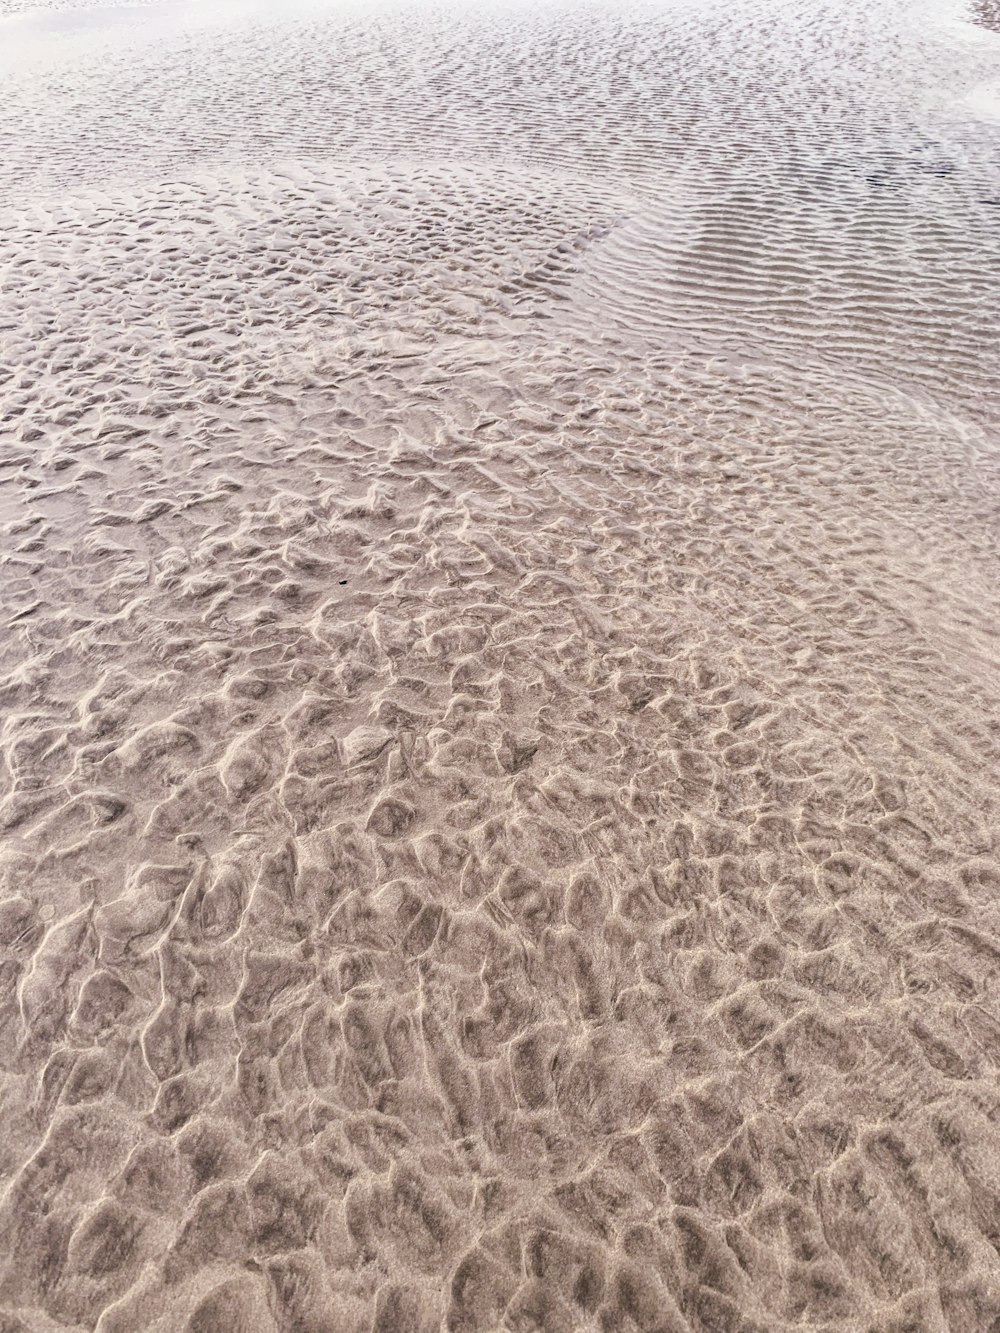 brown sand during day time